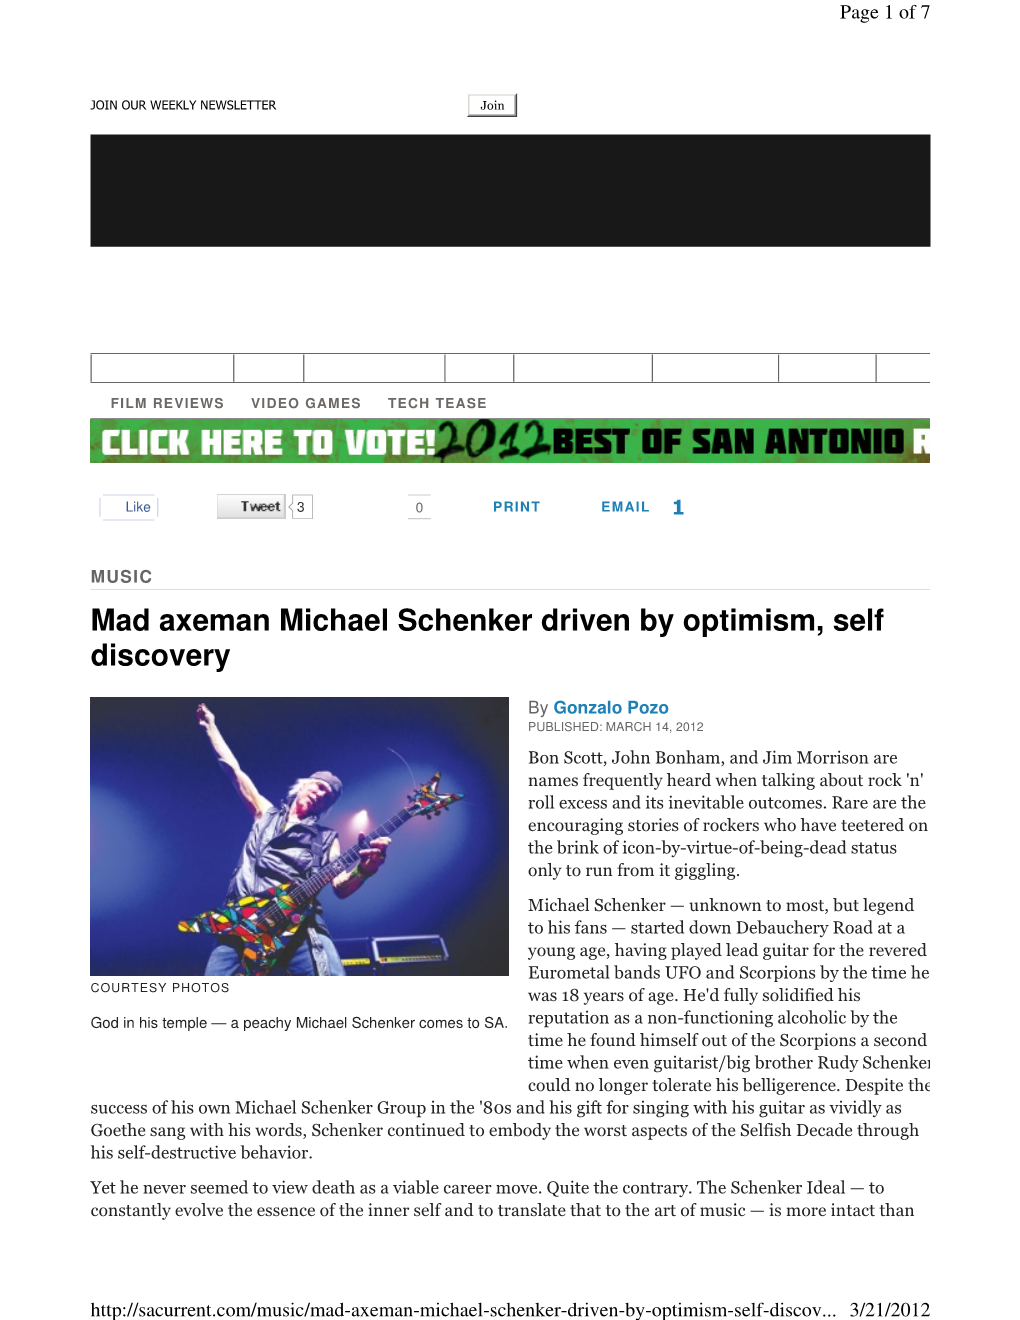 Mad Axeman Michael Schenker Driven by Optimism, Self Discovery